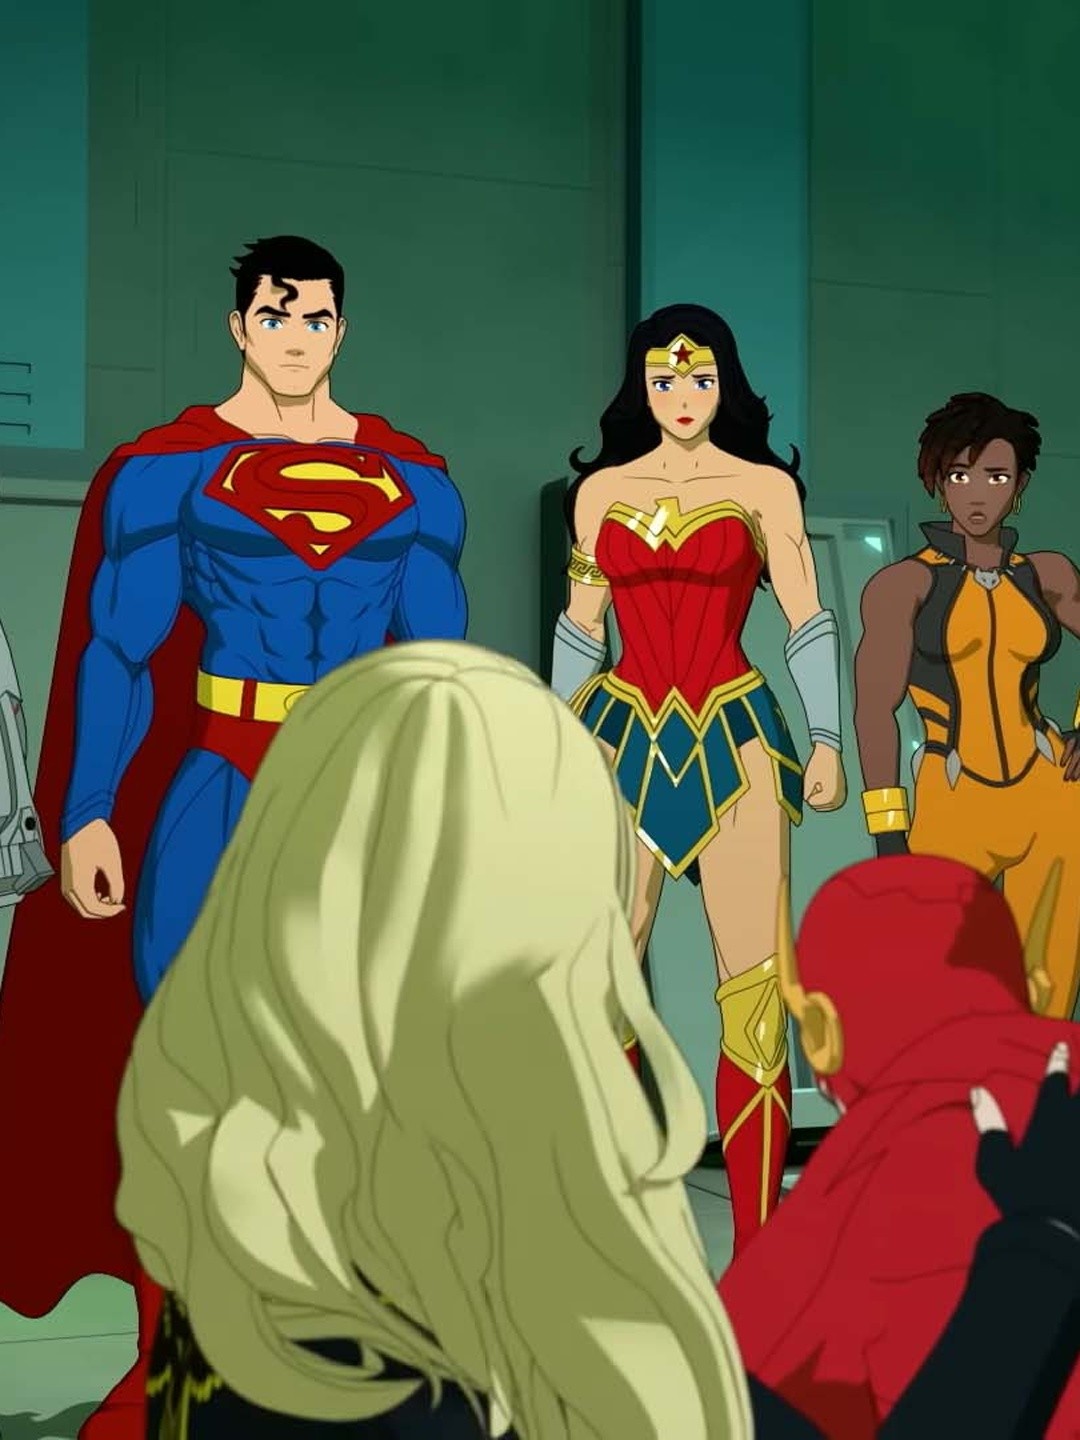 Justice League x RWBY: Super Heroes & Huntsmen Part Two - Rotten Tomatoes